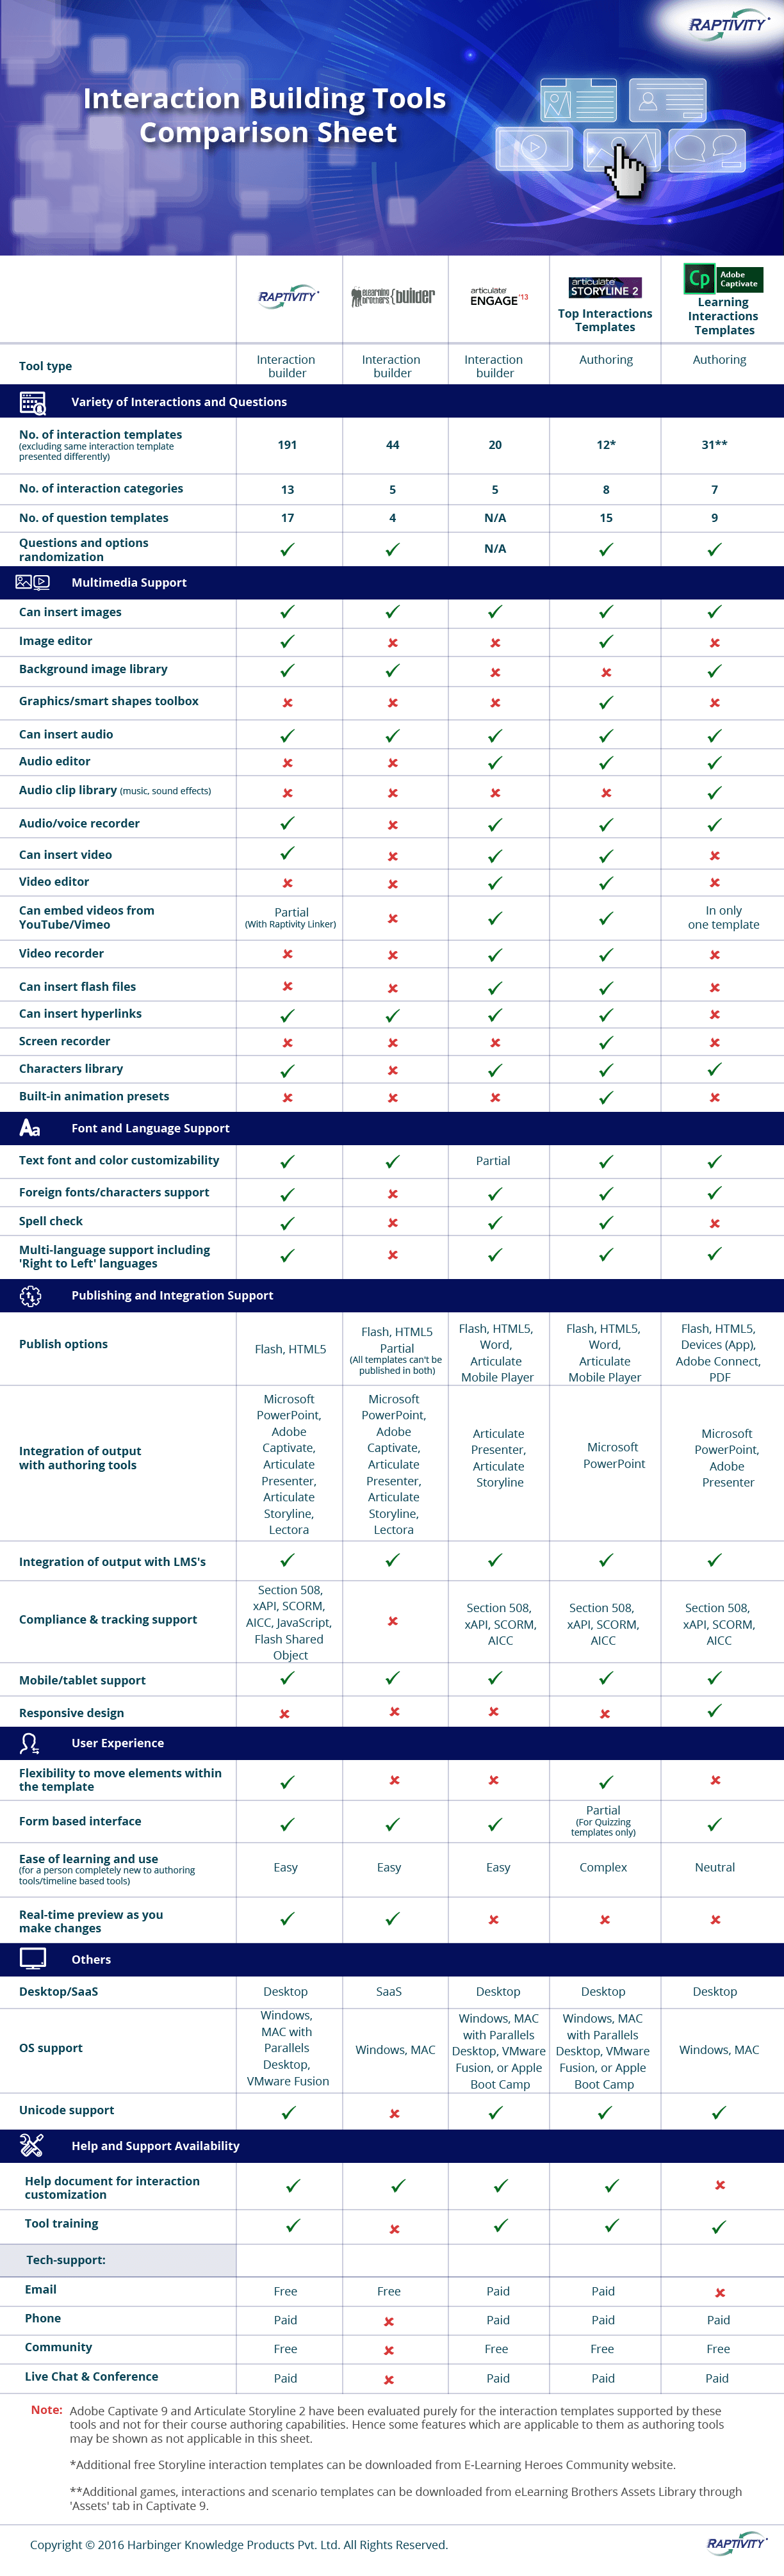 eLearning Interaction Building Tools Comparison Infographic